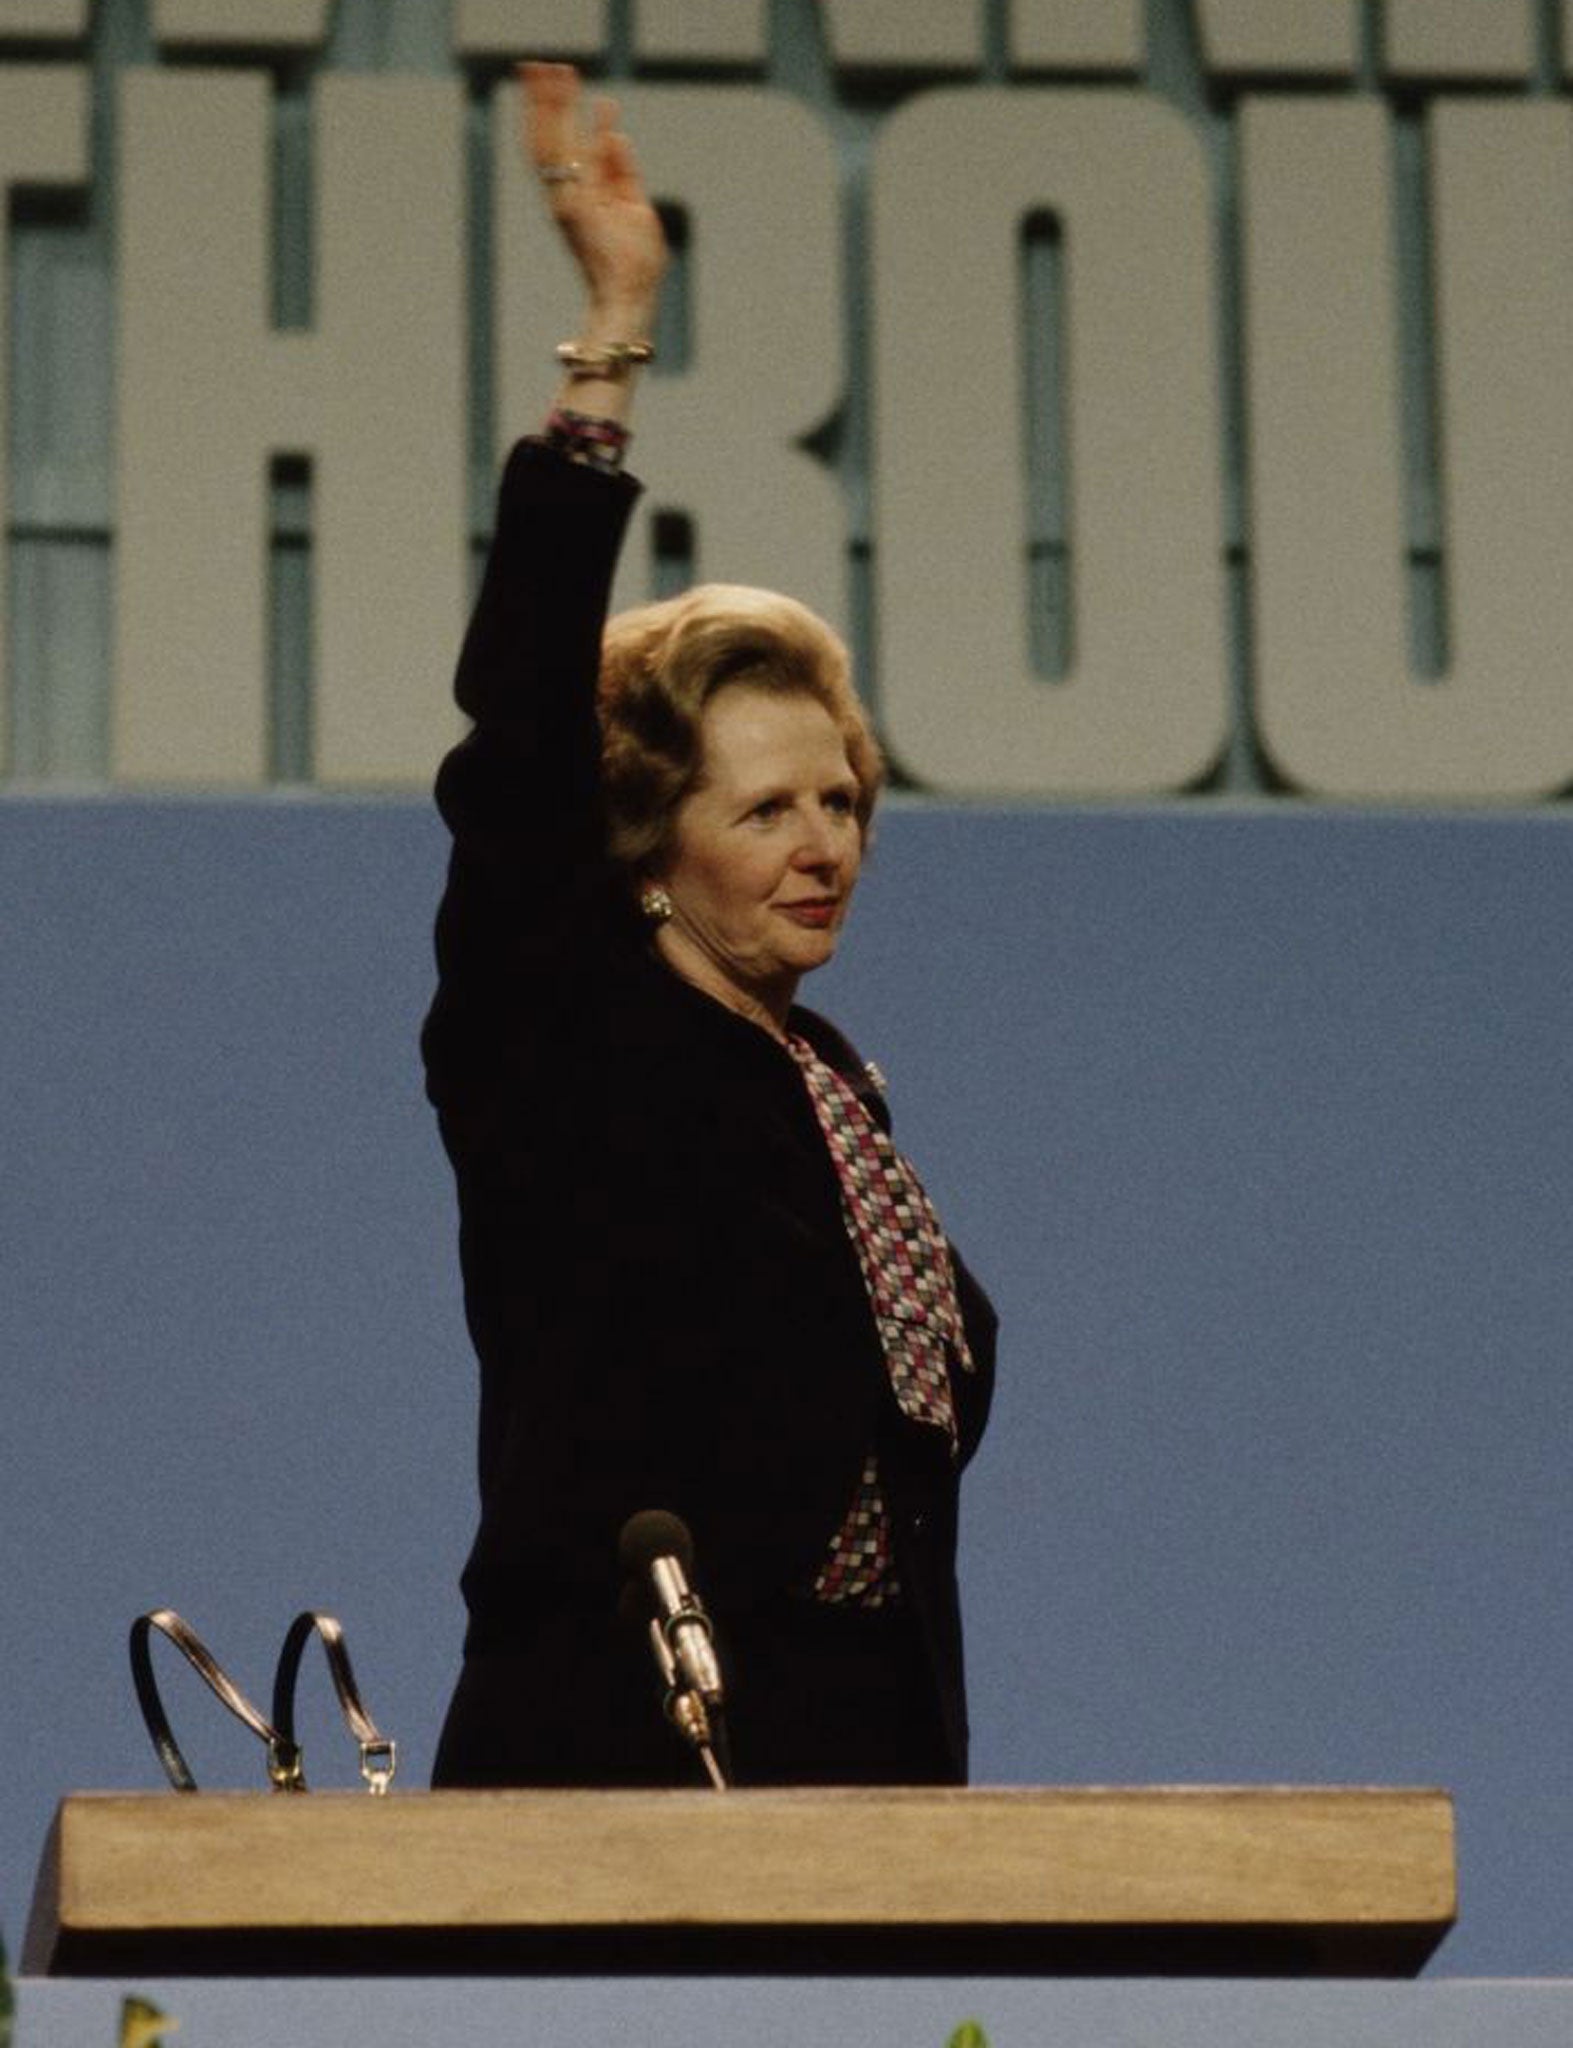 Margaret Thatcher had a complex relationship with the European Union